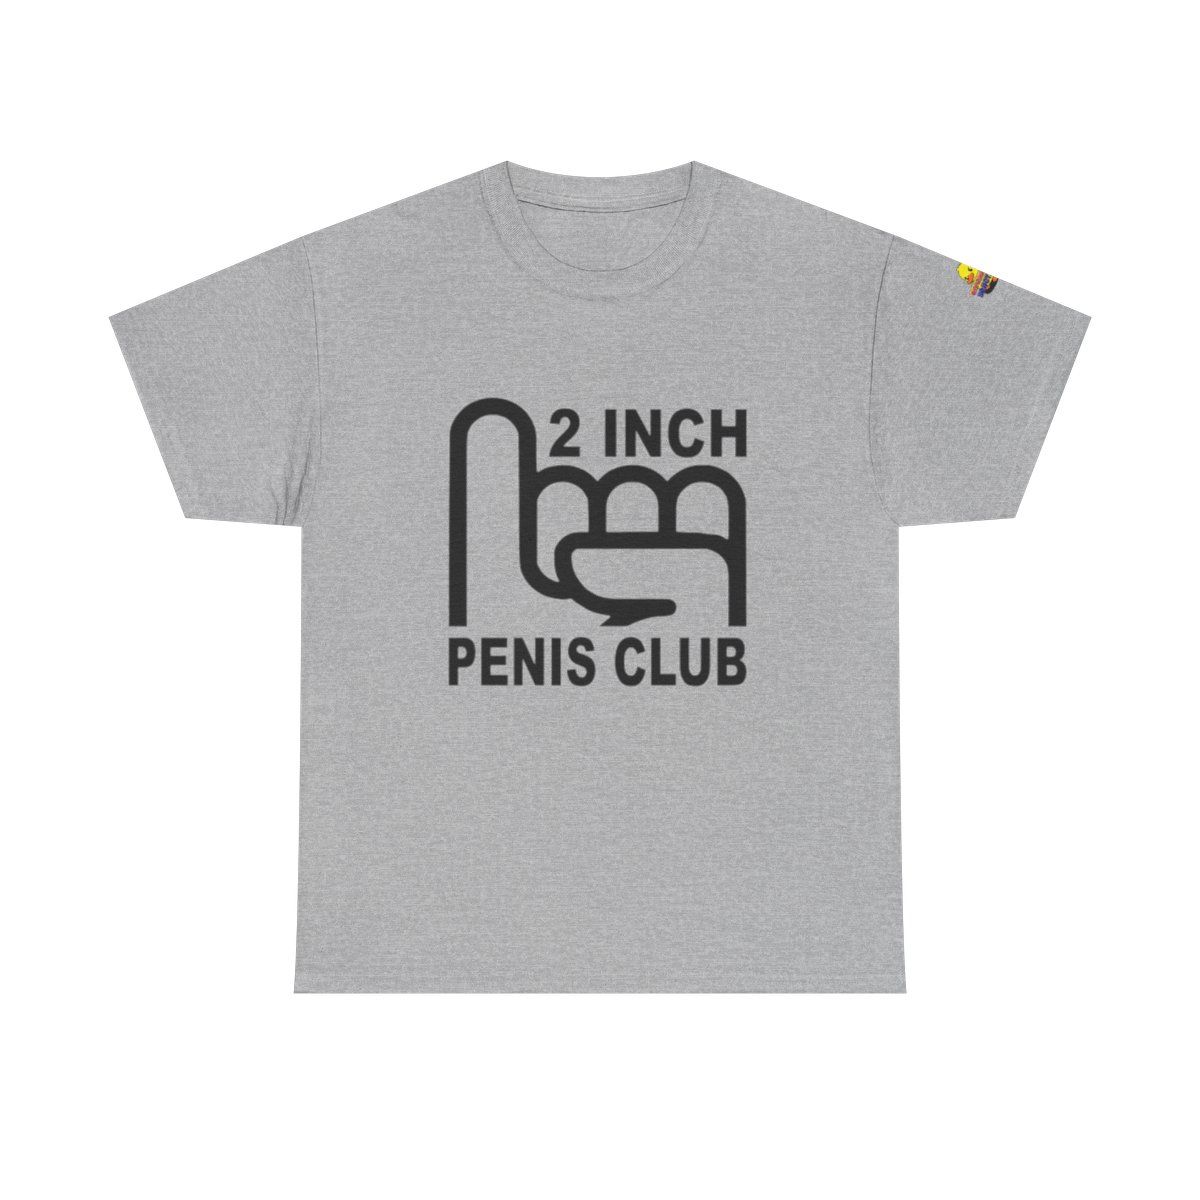 2in" Tee product thumbnail image